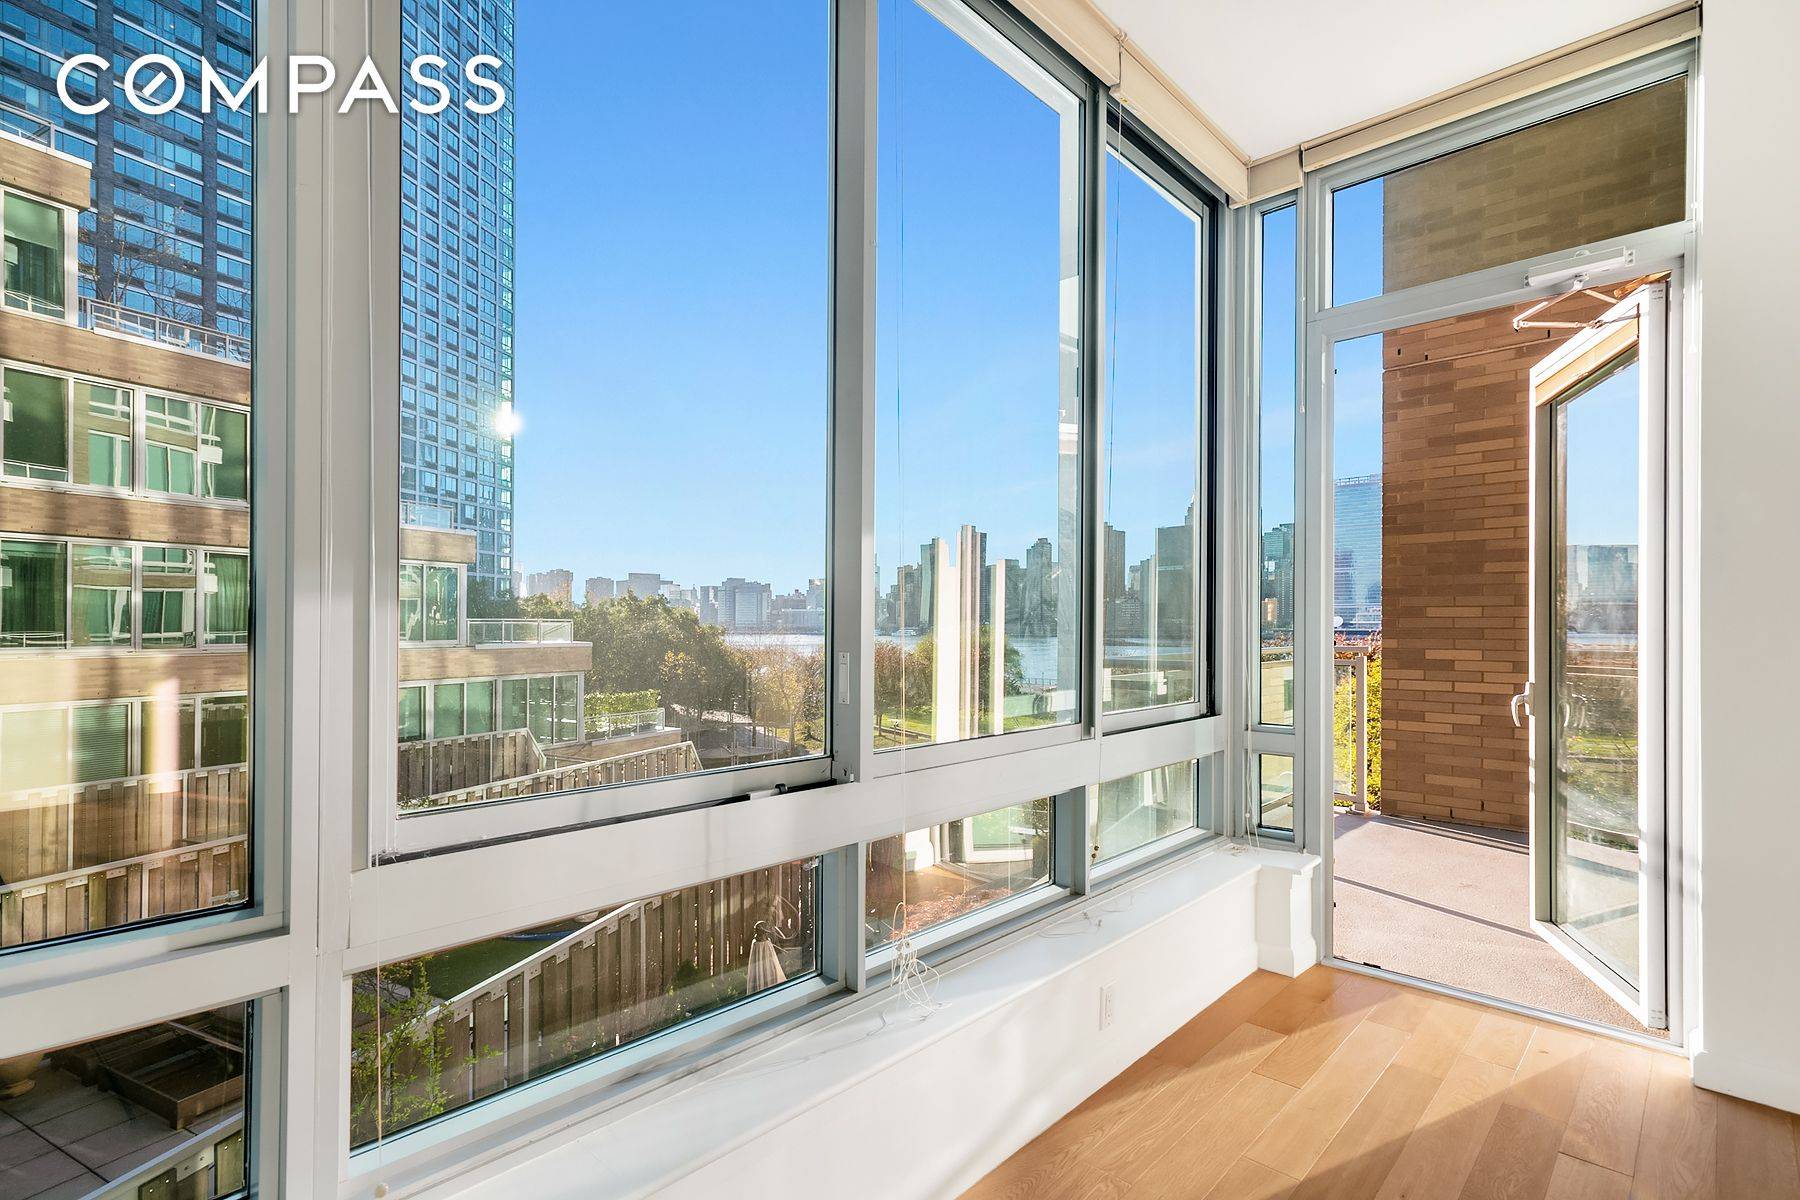 Simply Spectacular ! This sprawling sun drenched extra large one bedroom home with your own private balcony boasts the most amazing city and water views directly from your own living ...